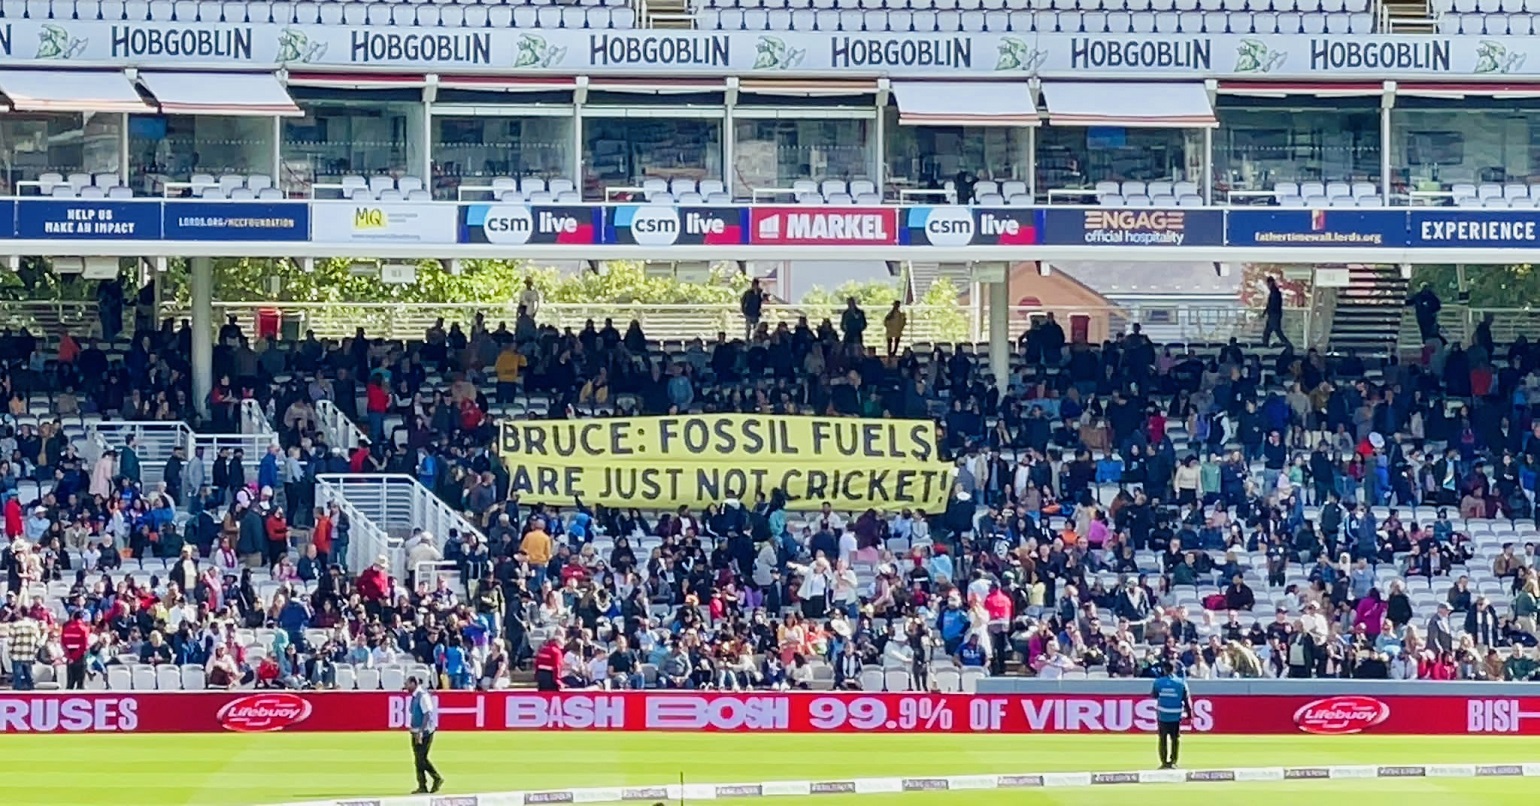 A photo of a banner at Lord's Cricket Ground reading "Bruce: Fossil Fuels are Just Not Cricket" 